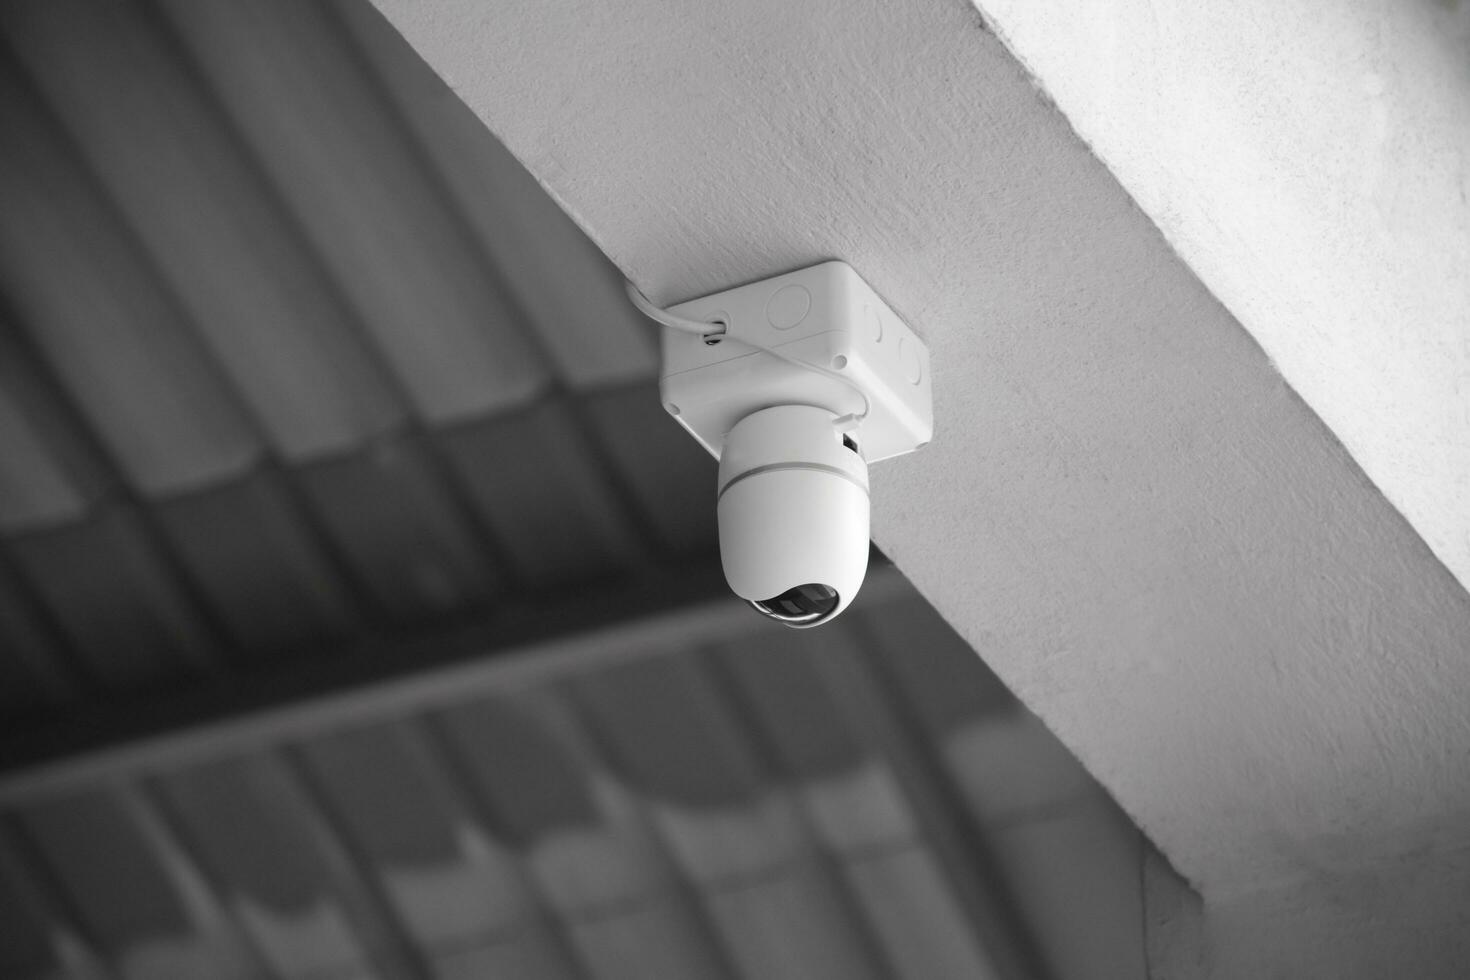 ip cctv camera installed on high ceiling of the house to do the security by monitoring through mobile phone and computer to save human life and property, soft and selecitve focus. photo